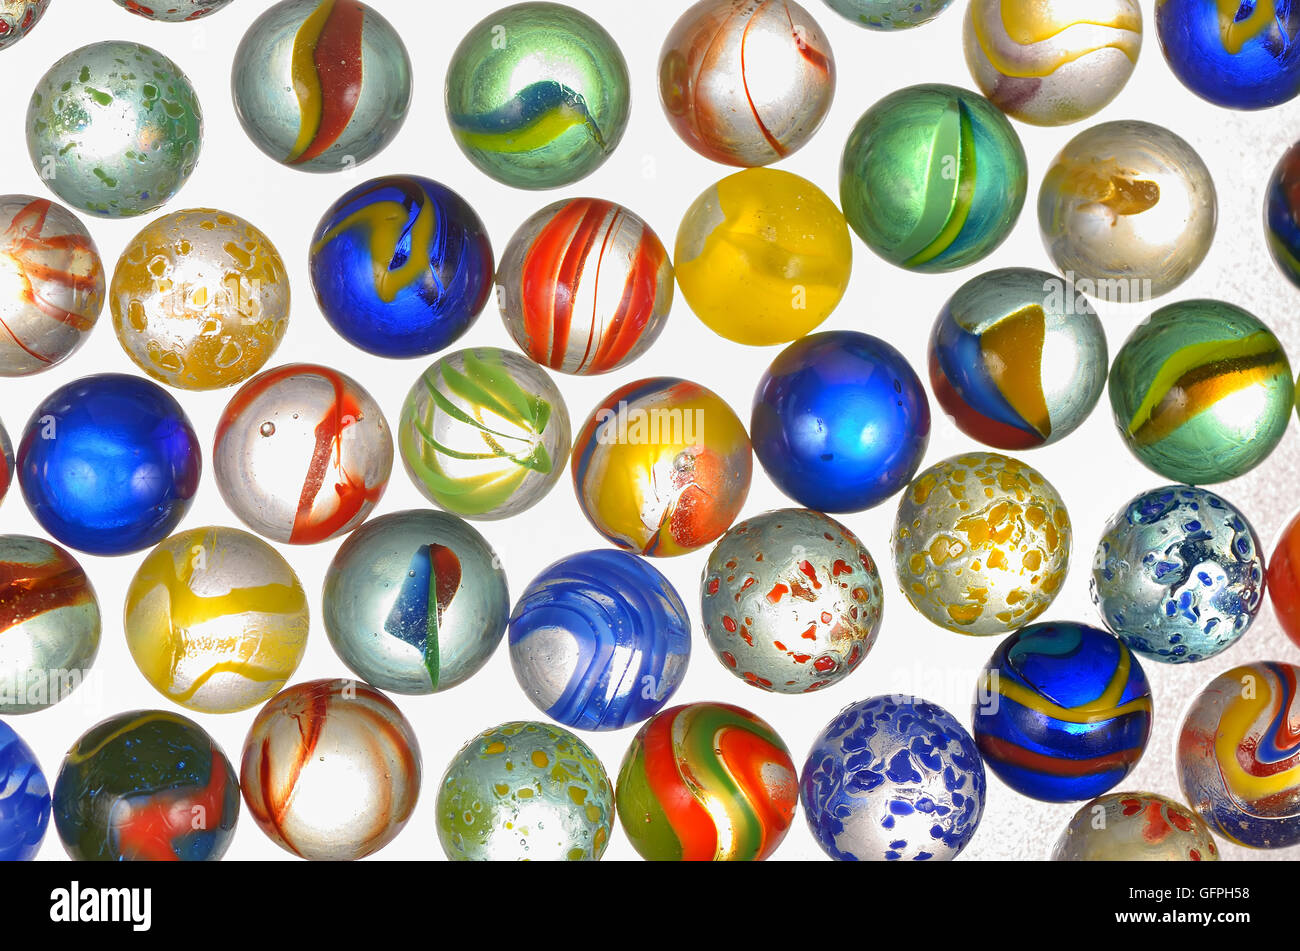 different marbles, glass balls Stock Photo